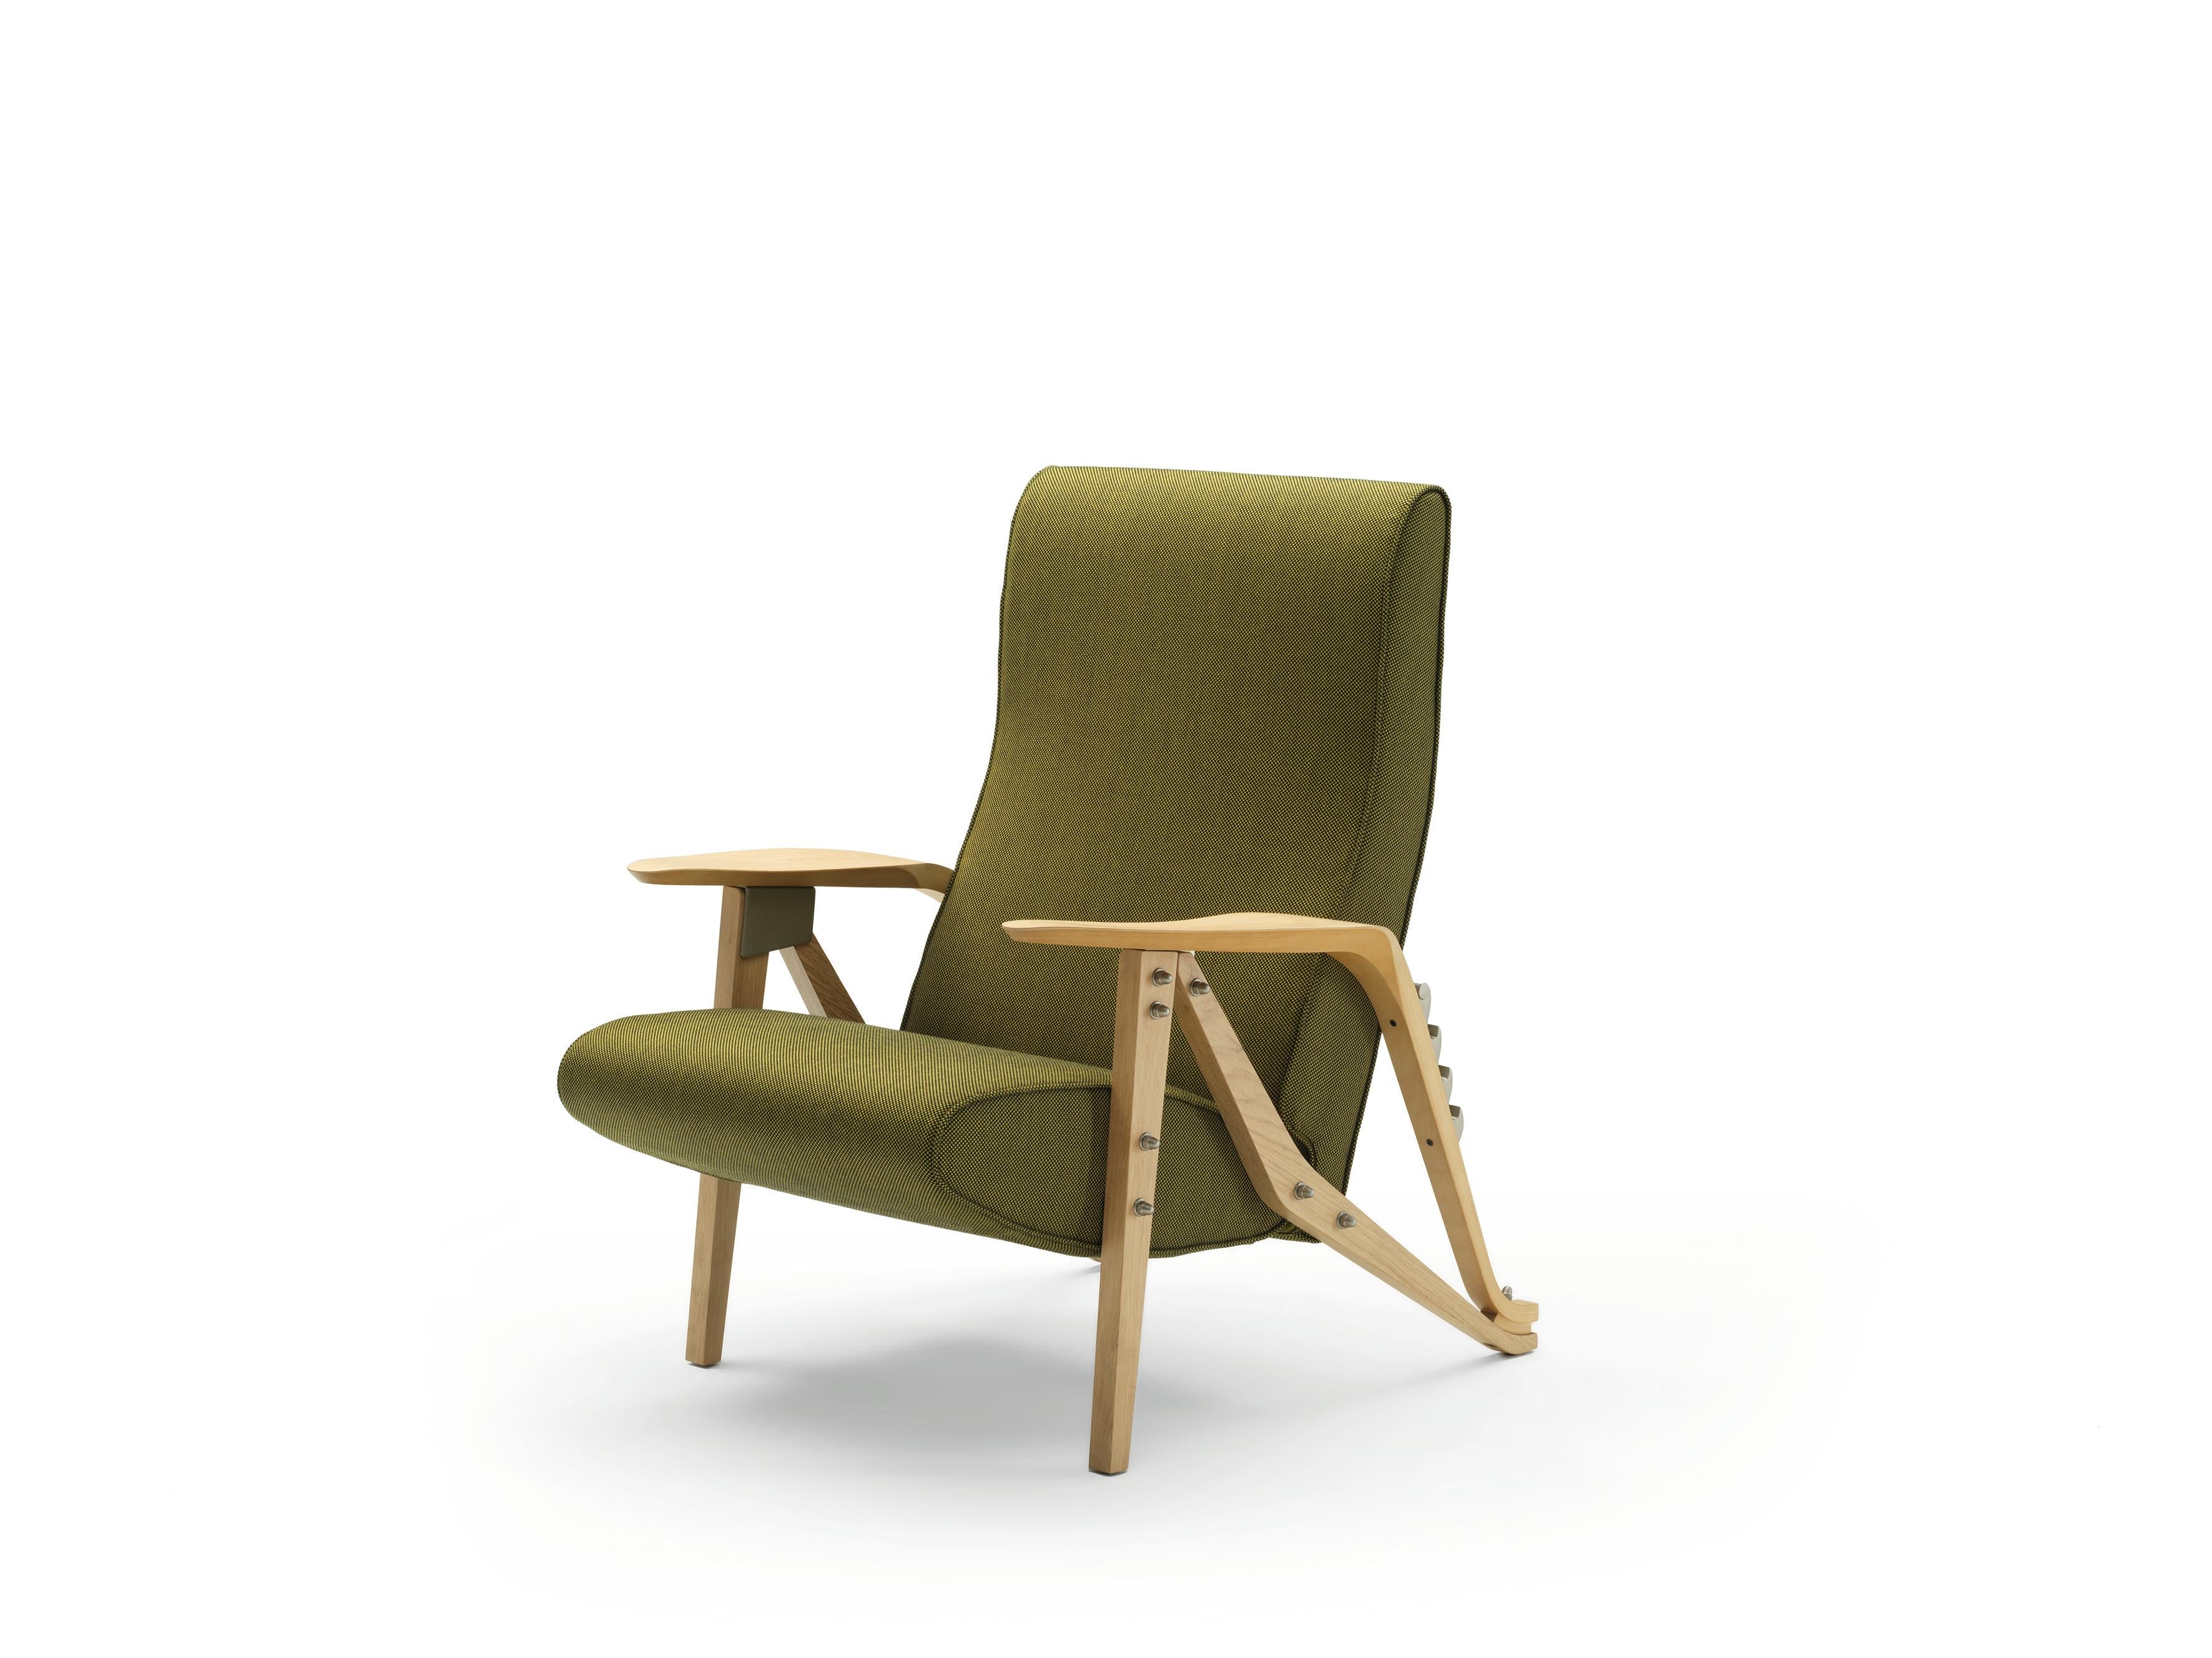 Zanotta Gilda CM Armchair in Green Upholstery with Natural Varnished Oak Frame by Carlo Mollino

Frame in natural or black varnished oak, or in natural Canaletto walnut; wax-finished varnish. Black-nickel satin finished brass metal components.